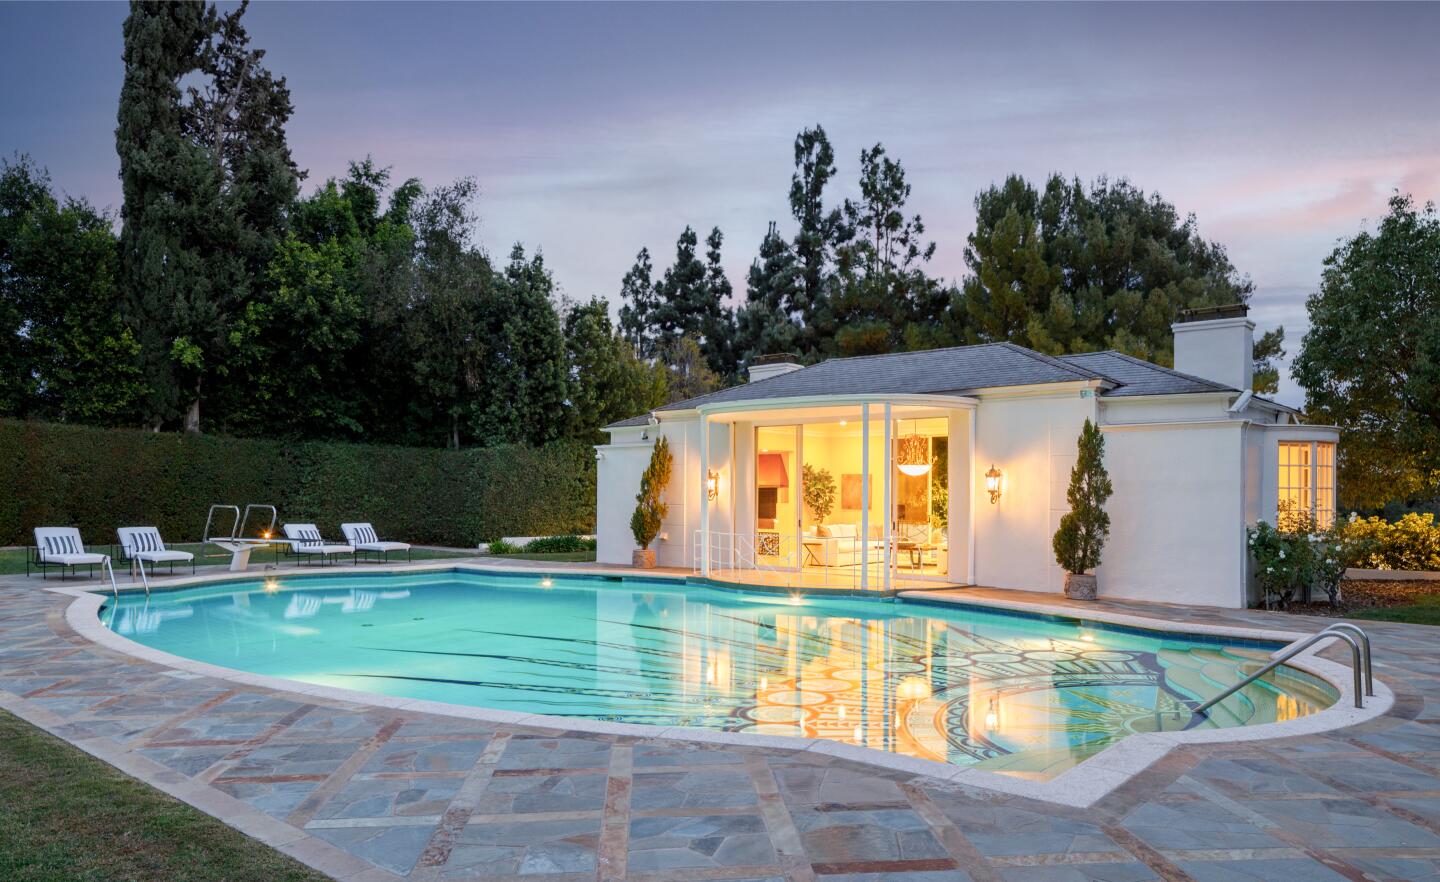 The pool house.